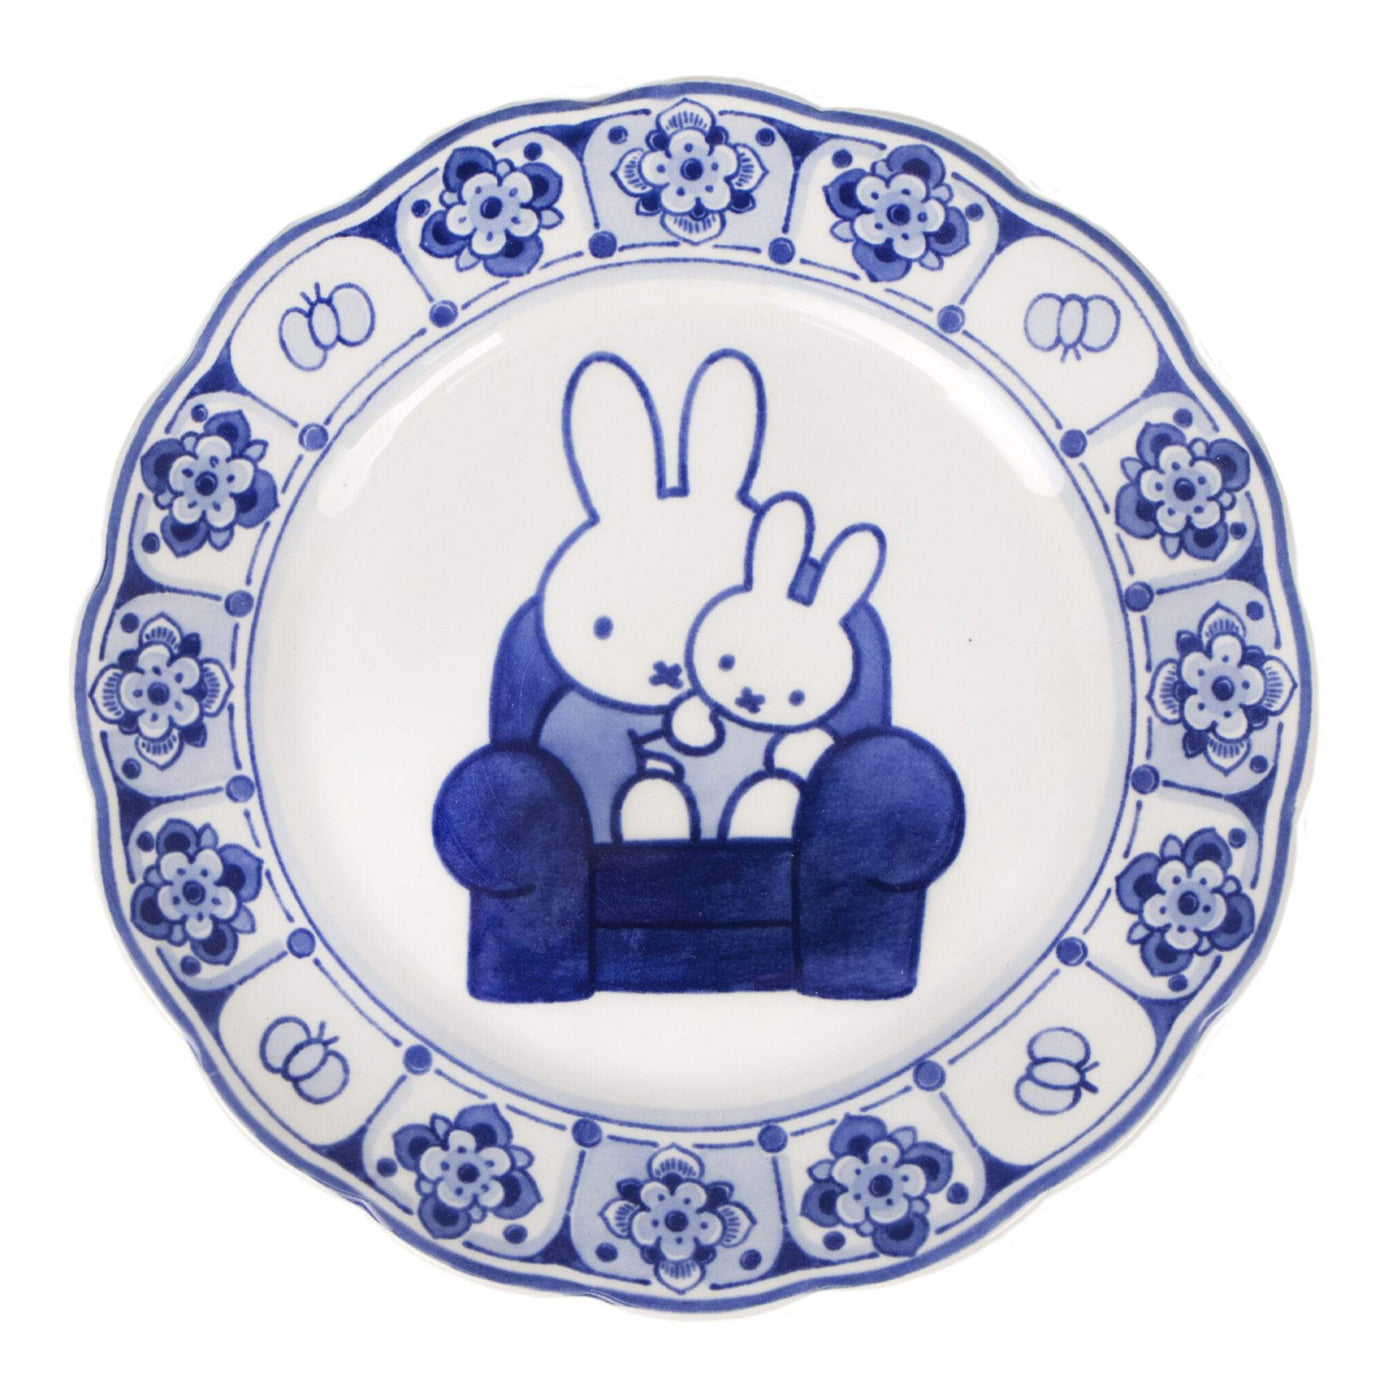 Miffy Plate Delft Blue by Royal Delft